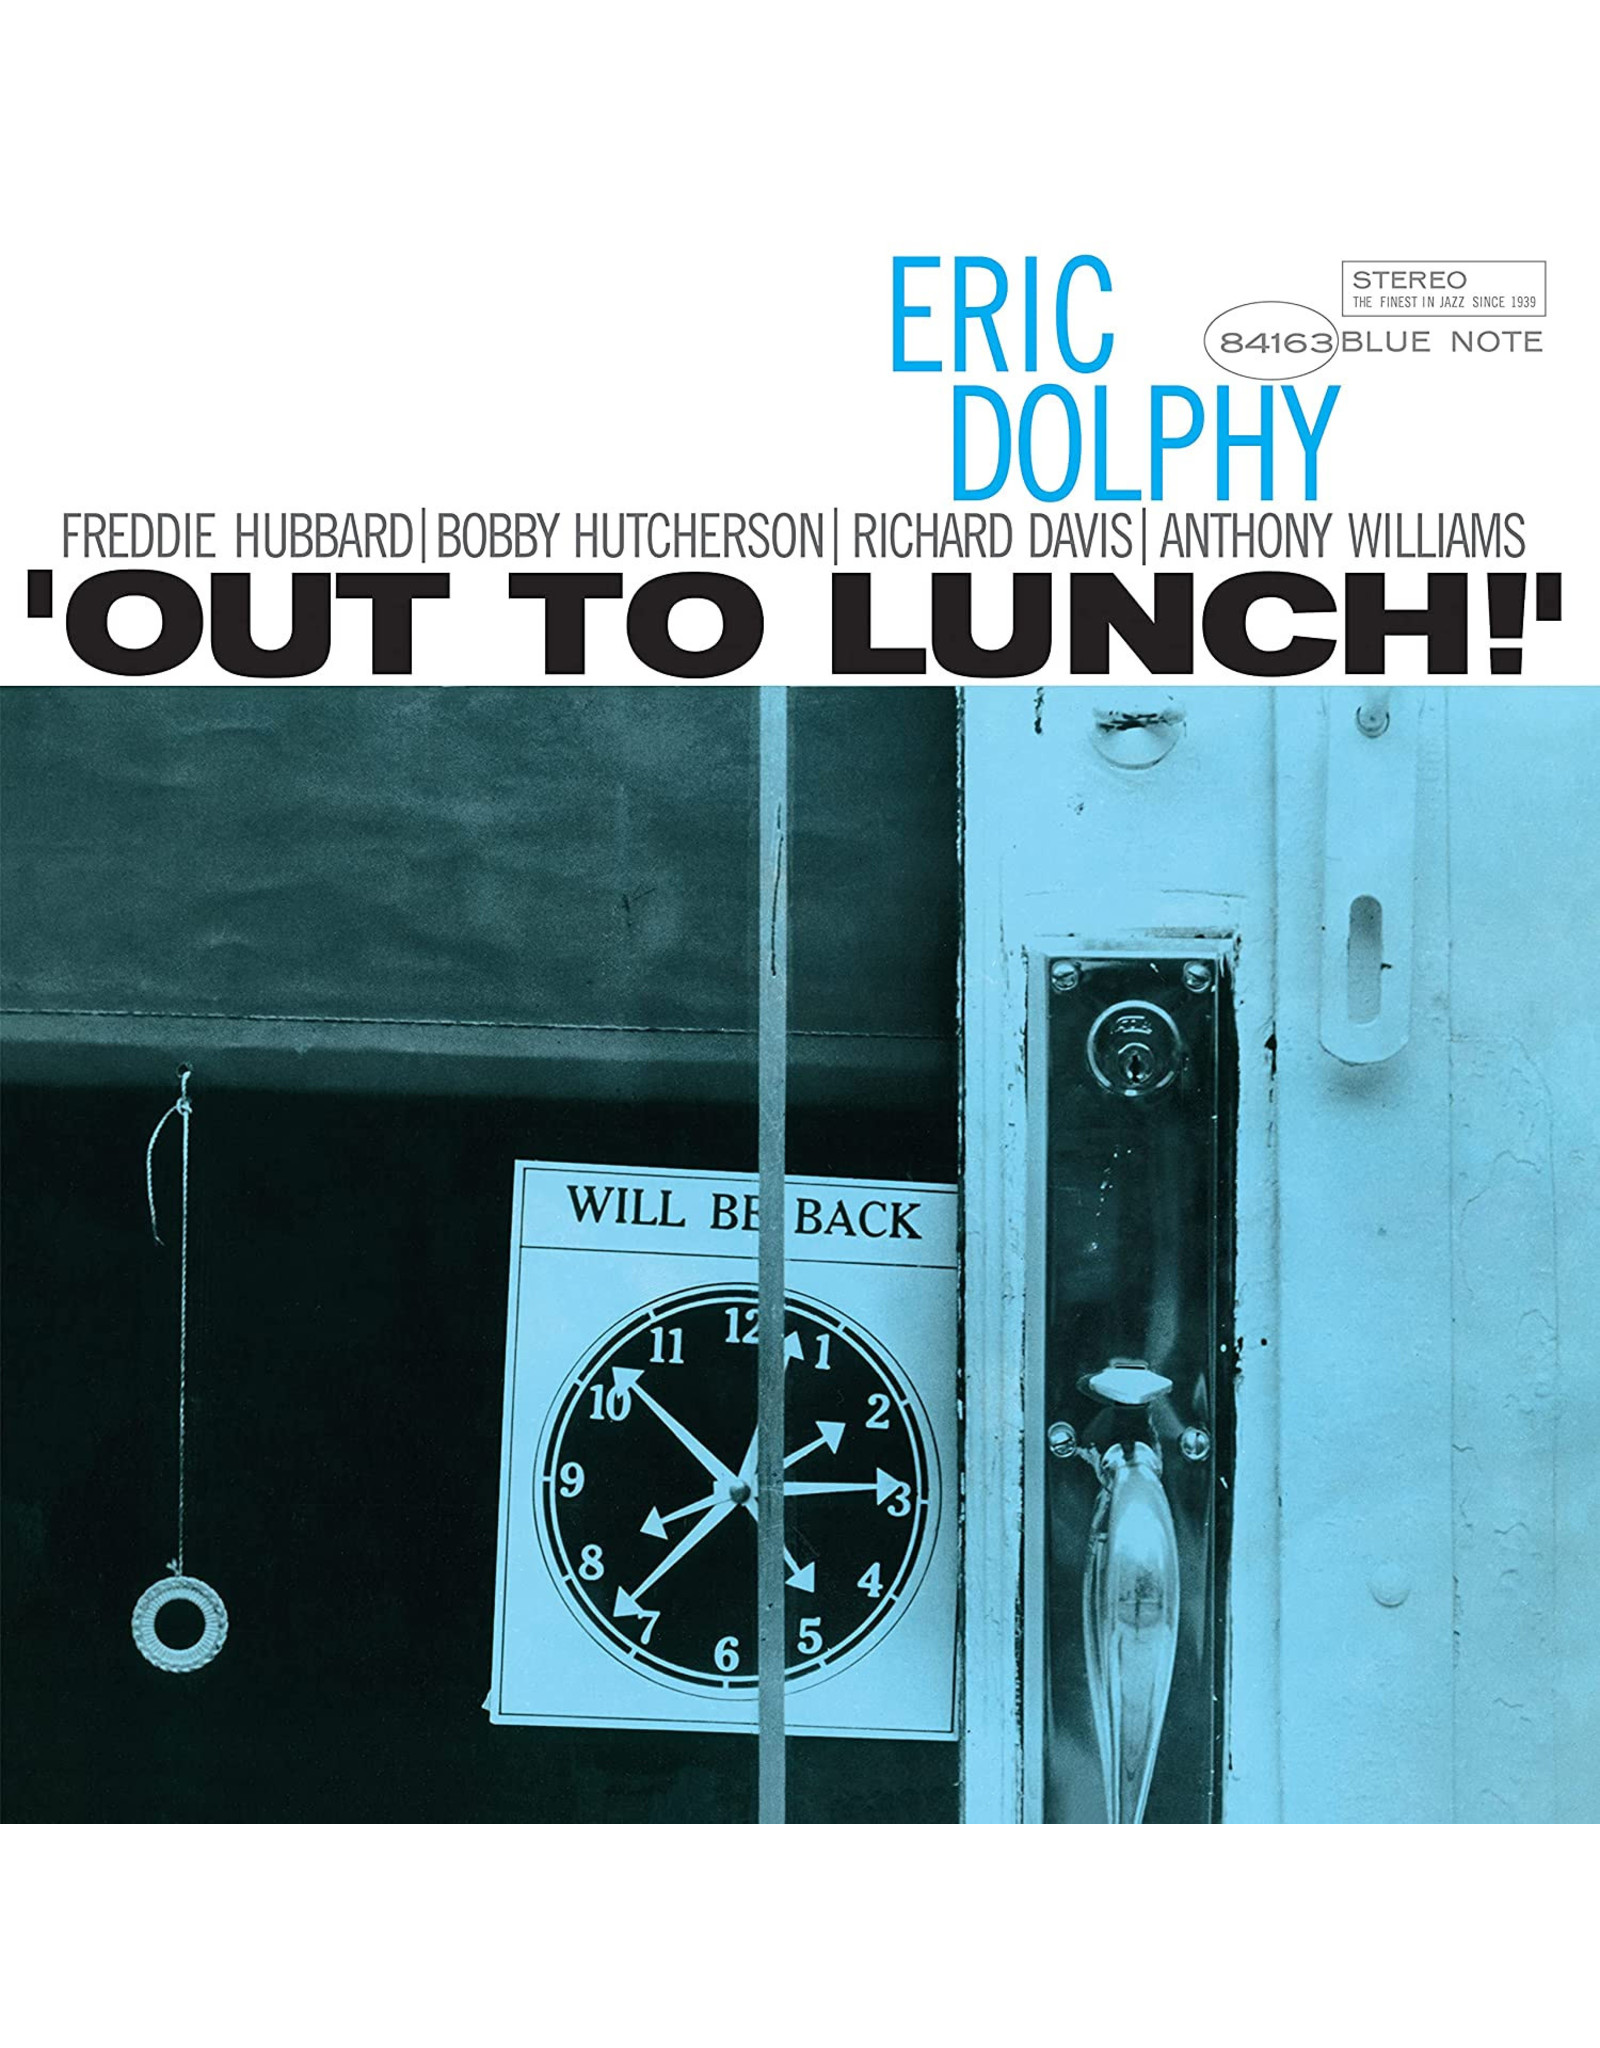 Dolphy, Eric - Out To Lunch LP (Blue Note Classic)